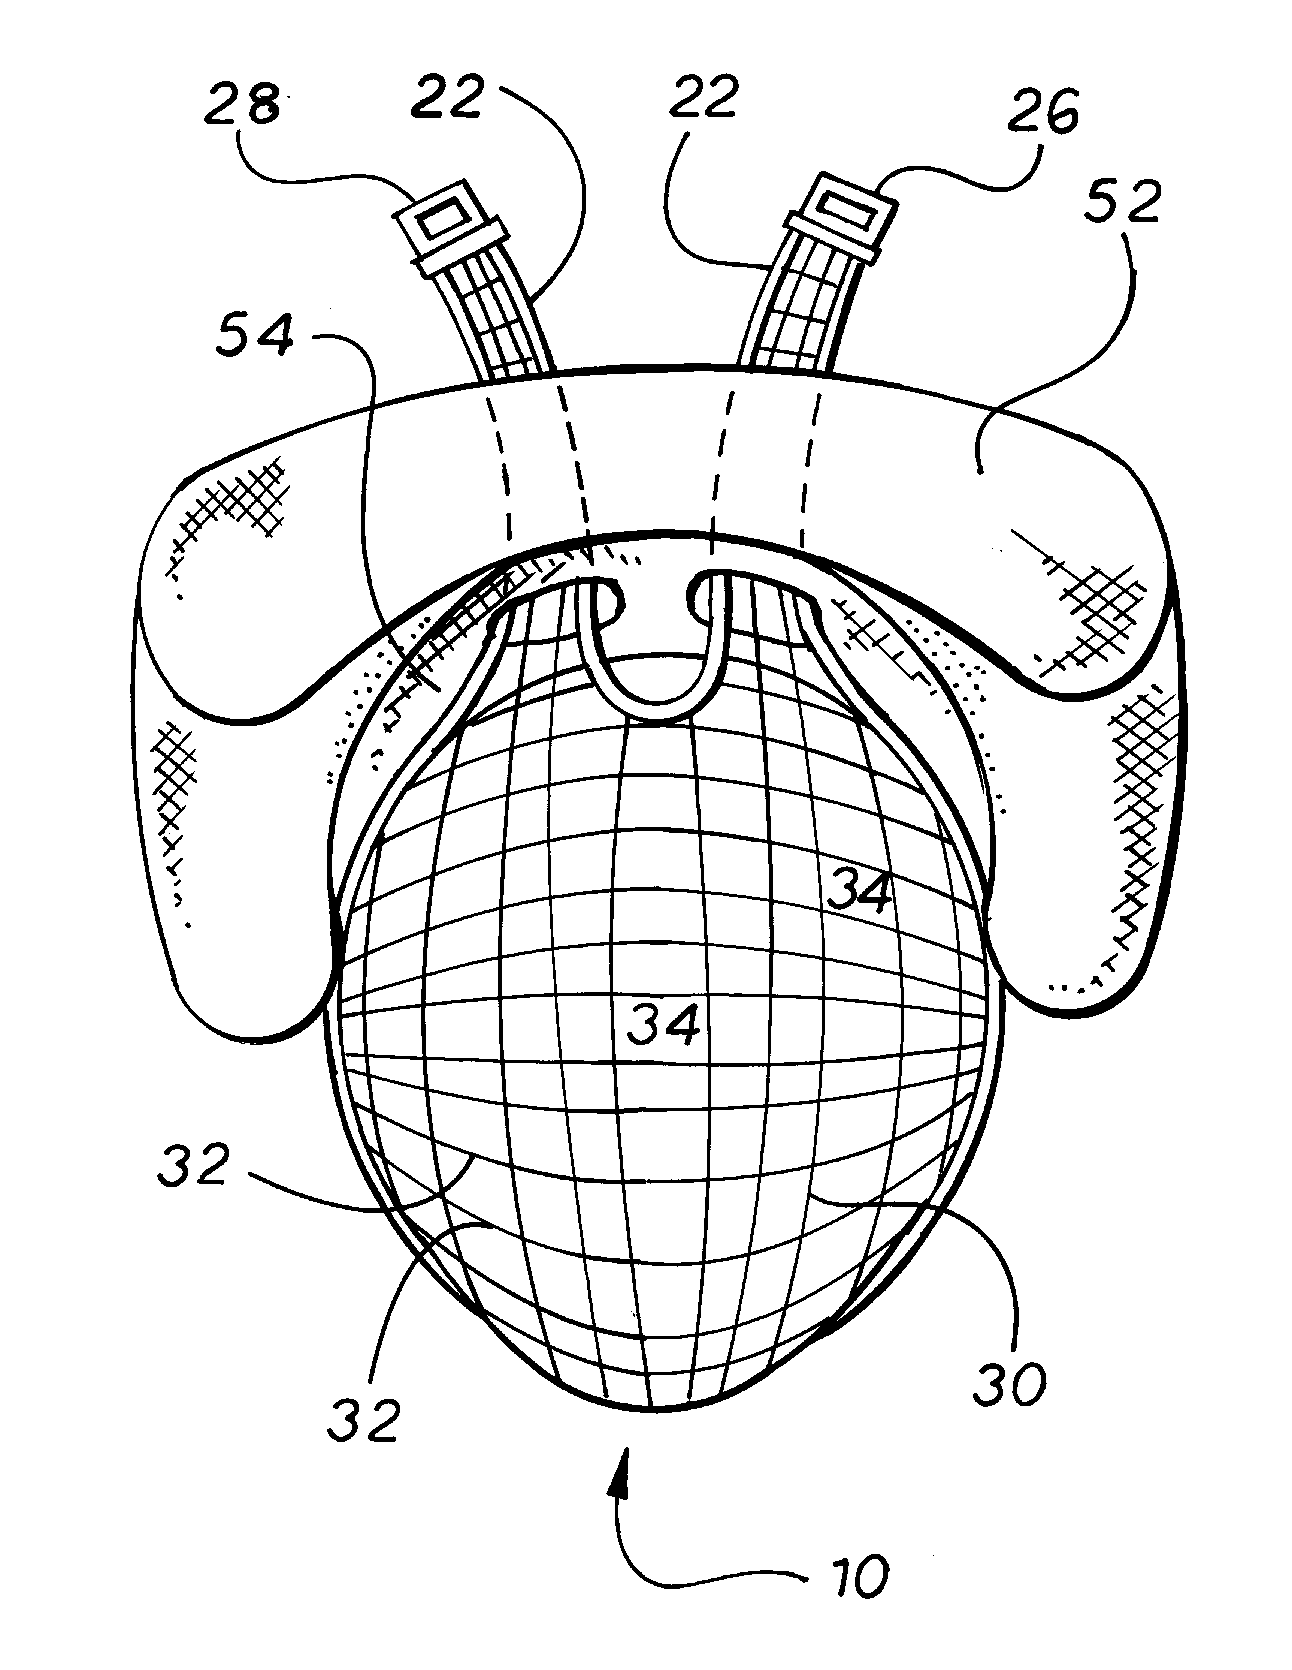 Vehicular head and neck safety system and method